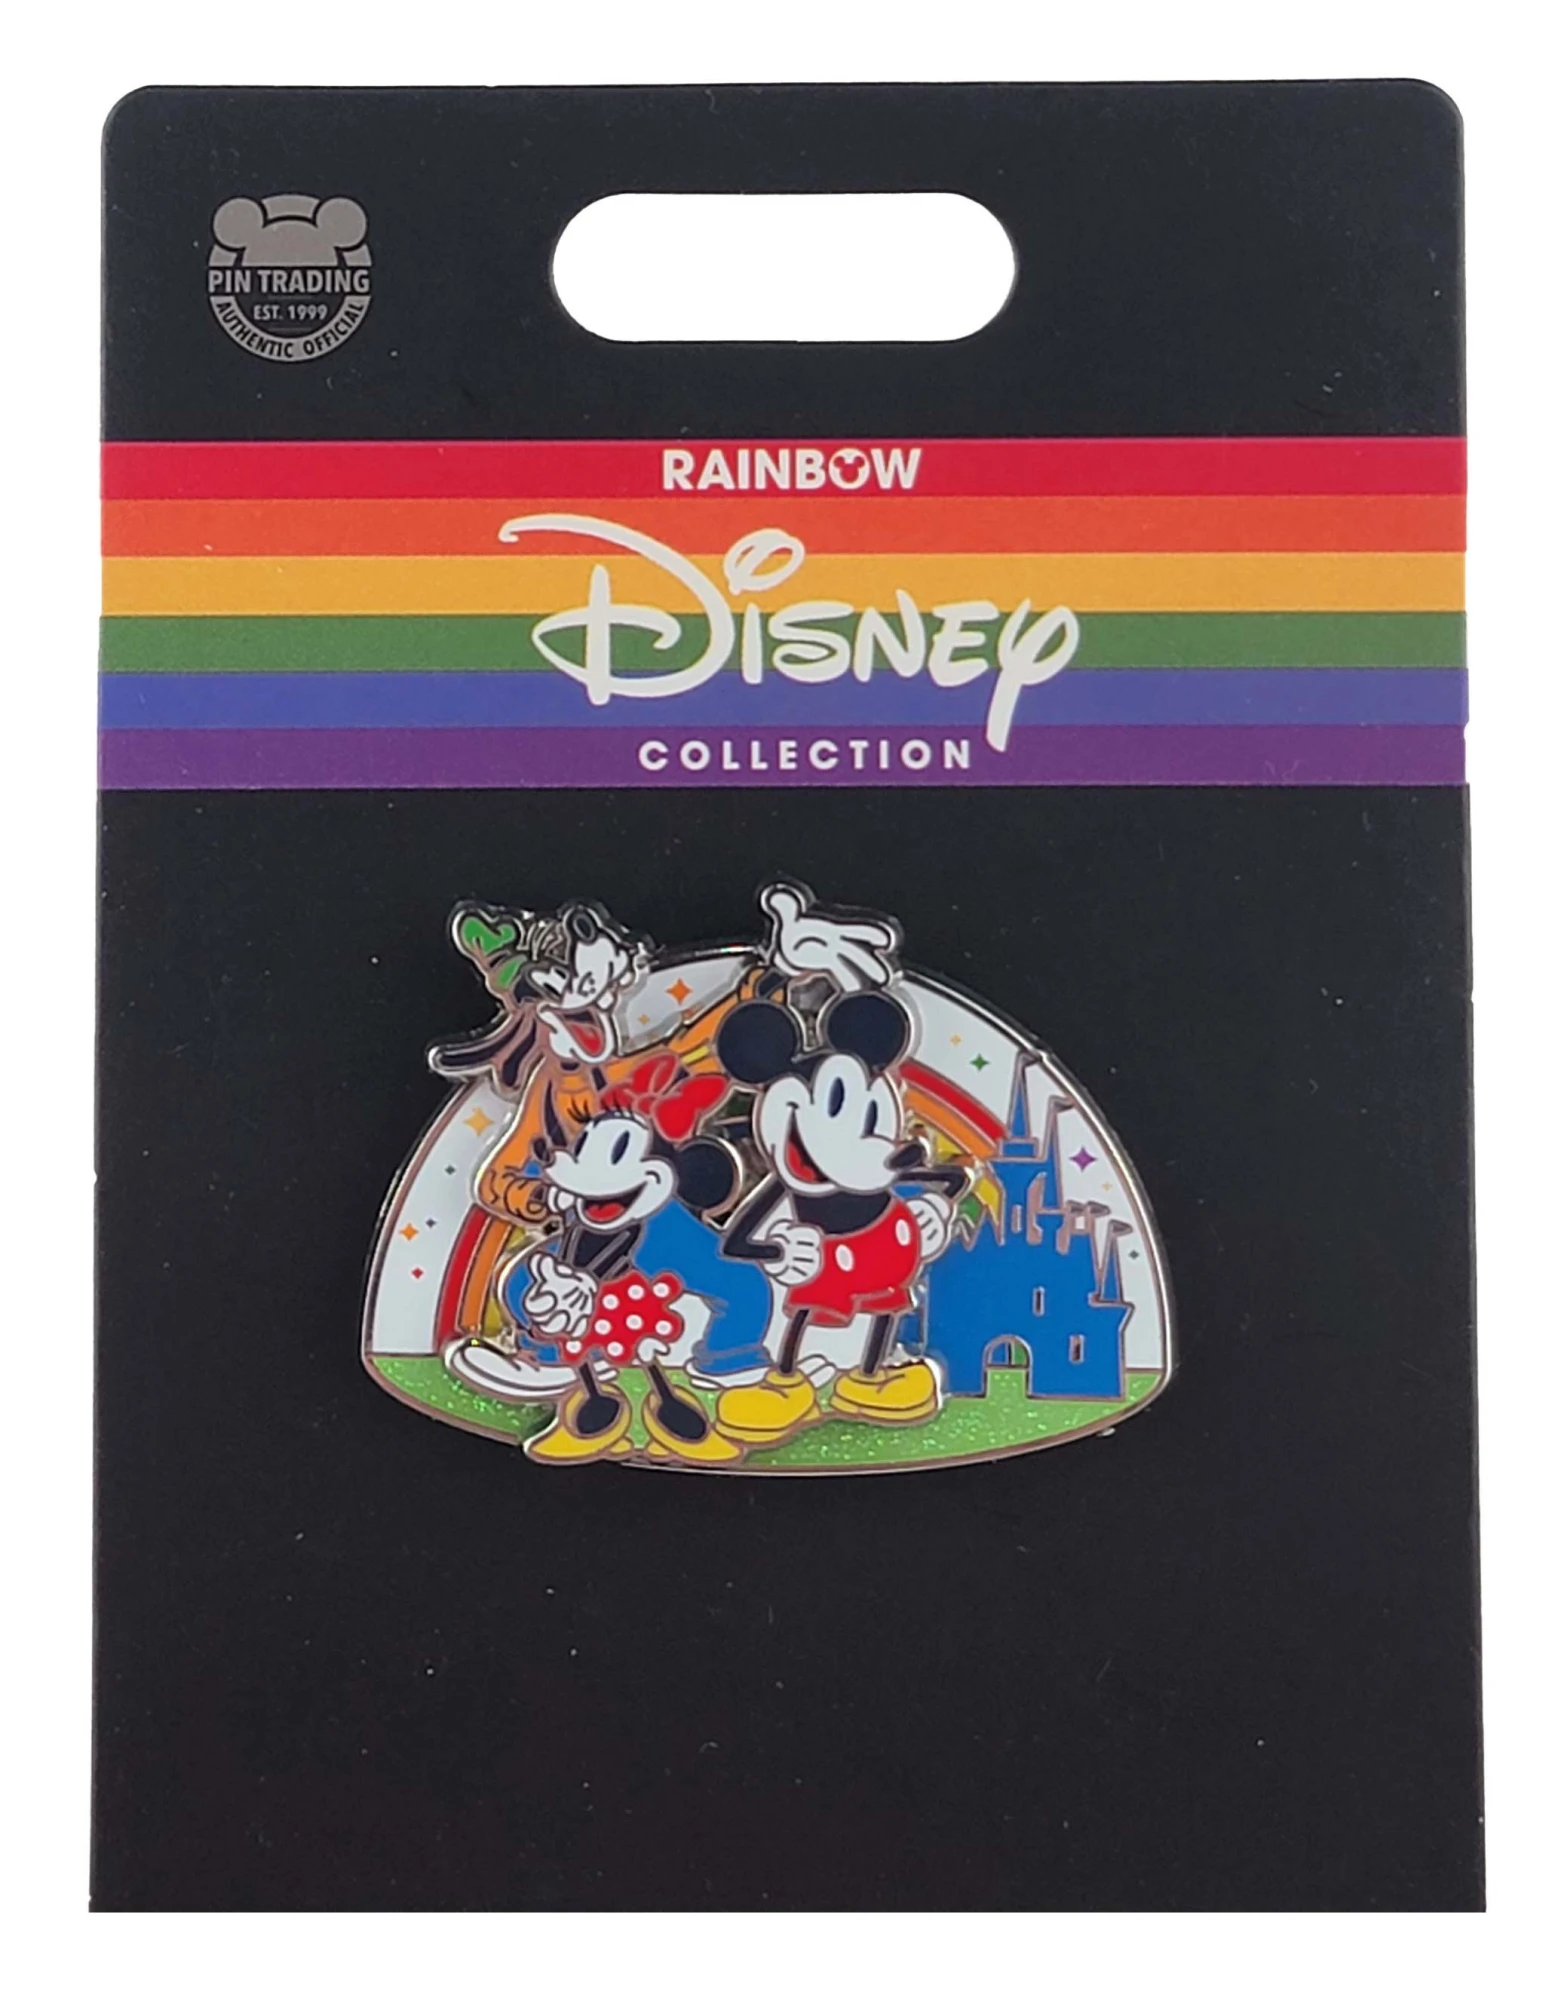 item Disney Pin - Rainbow Collection - Pride - Mickey Mouse and Friends 142818